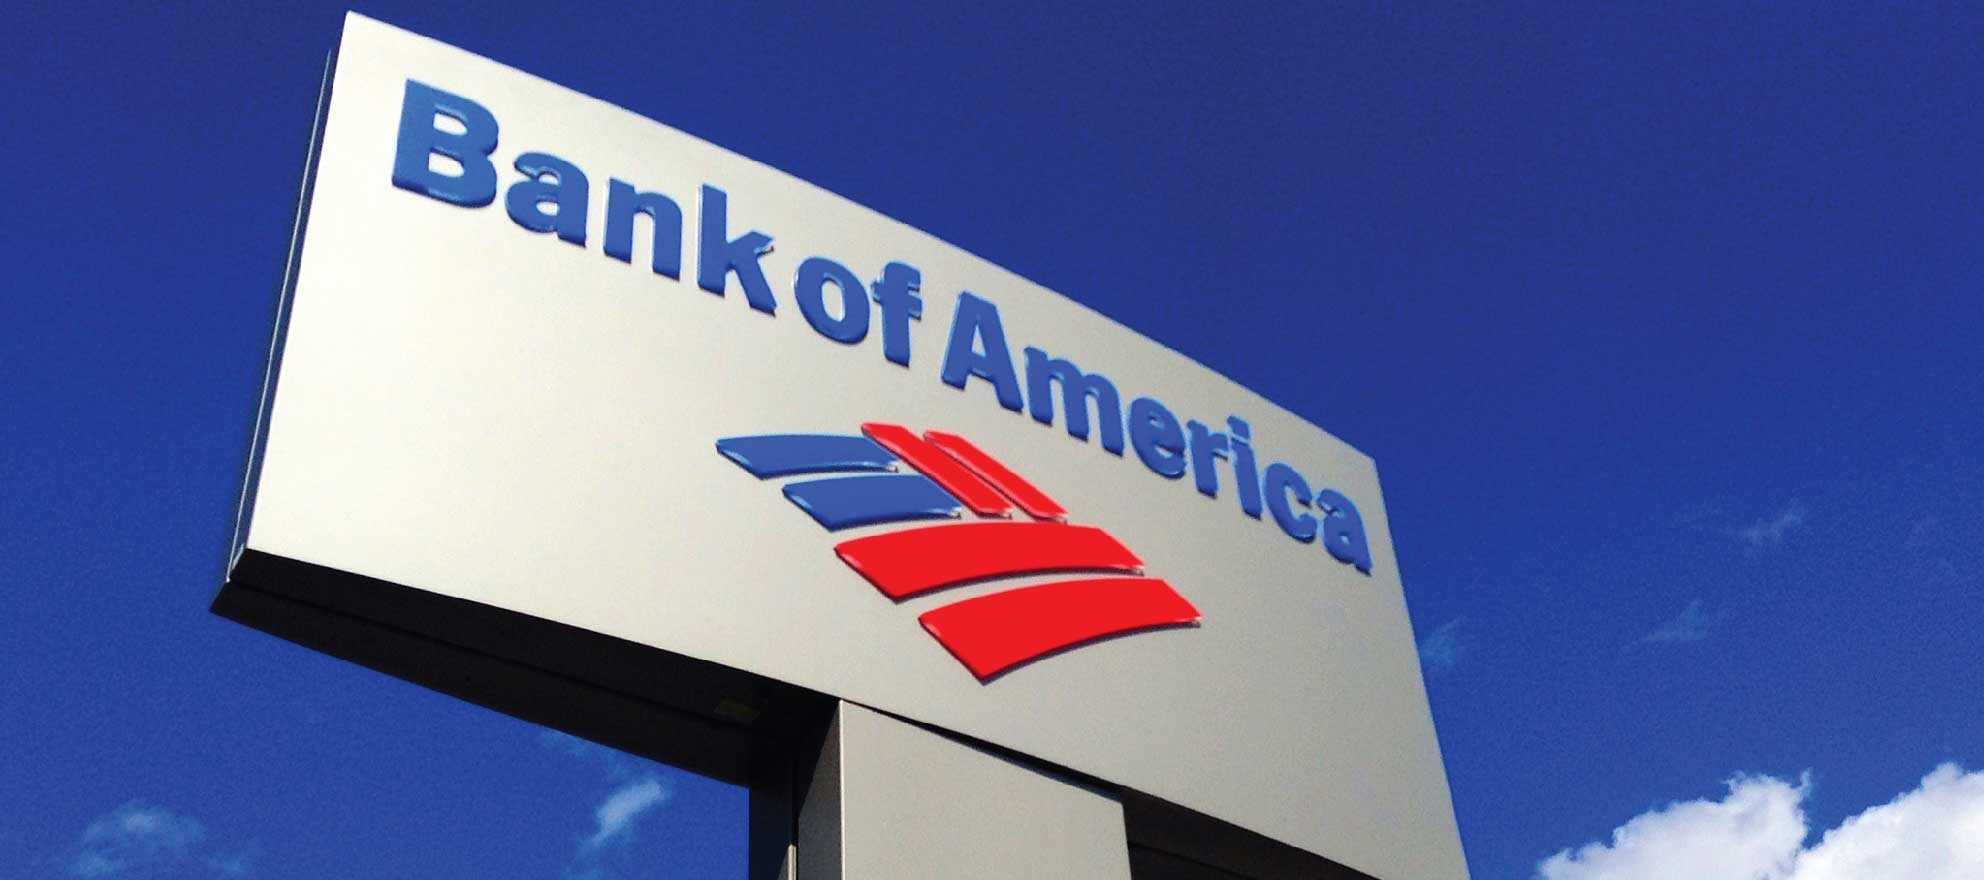 bank-of-america-introduces-digital-mortgage-product